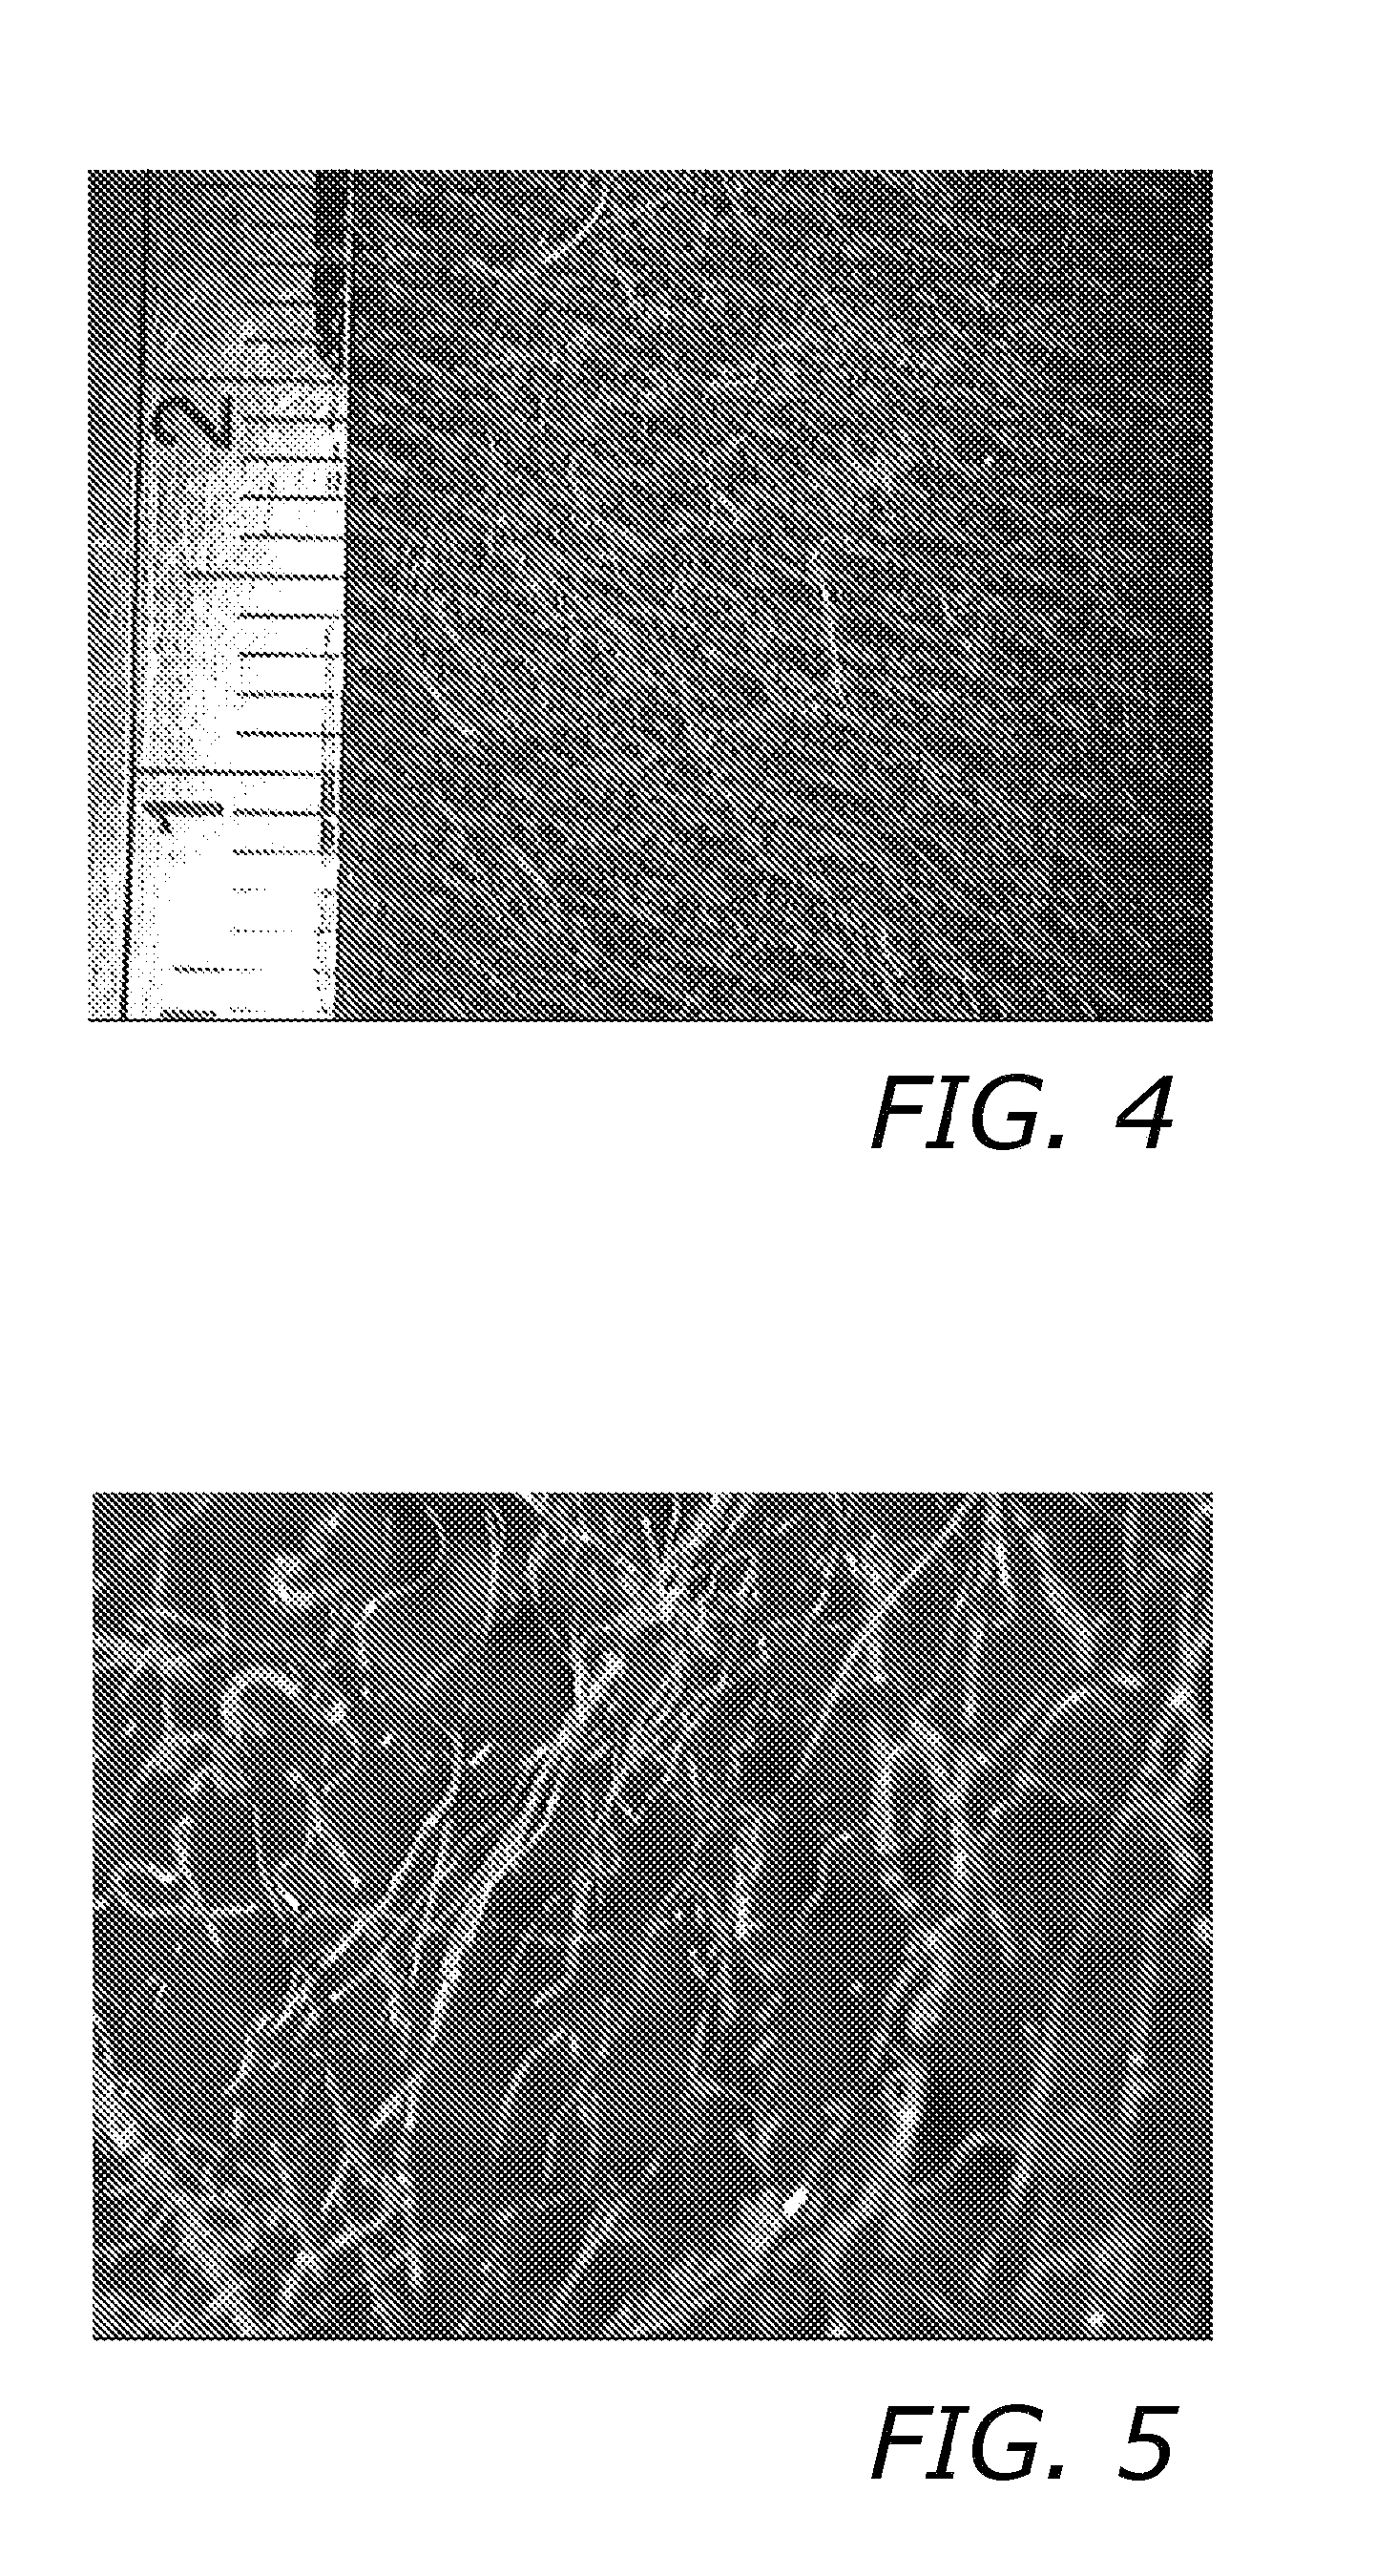 Structured thermoplastic in composite interleaves